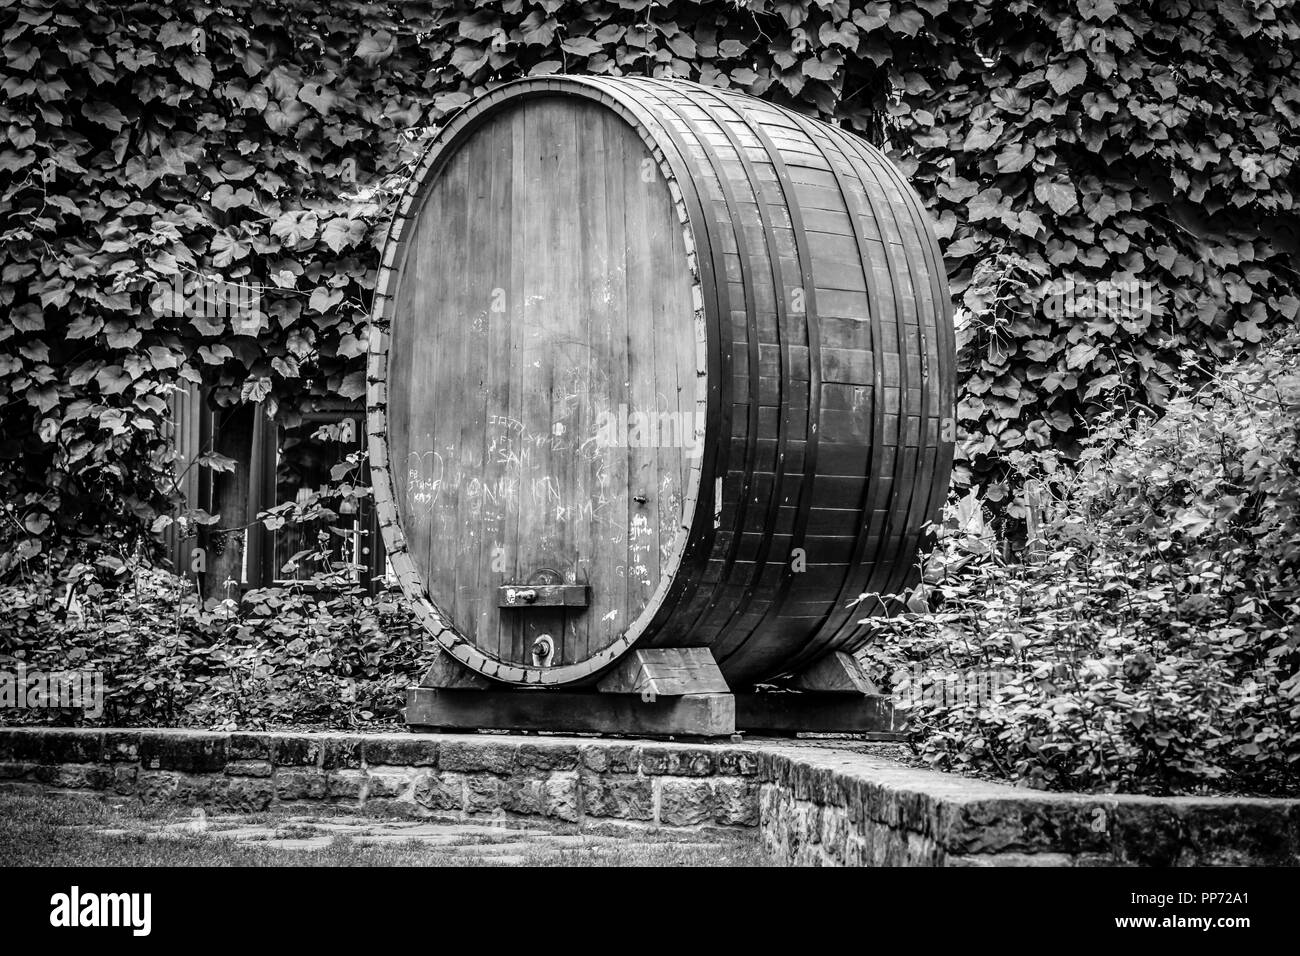 Still in use, a giant vintage oak wine barrel with a functioning spigot in a garden in Strasbourg, France Stock Photo